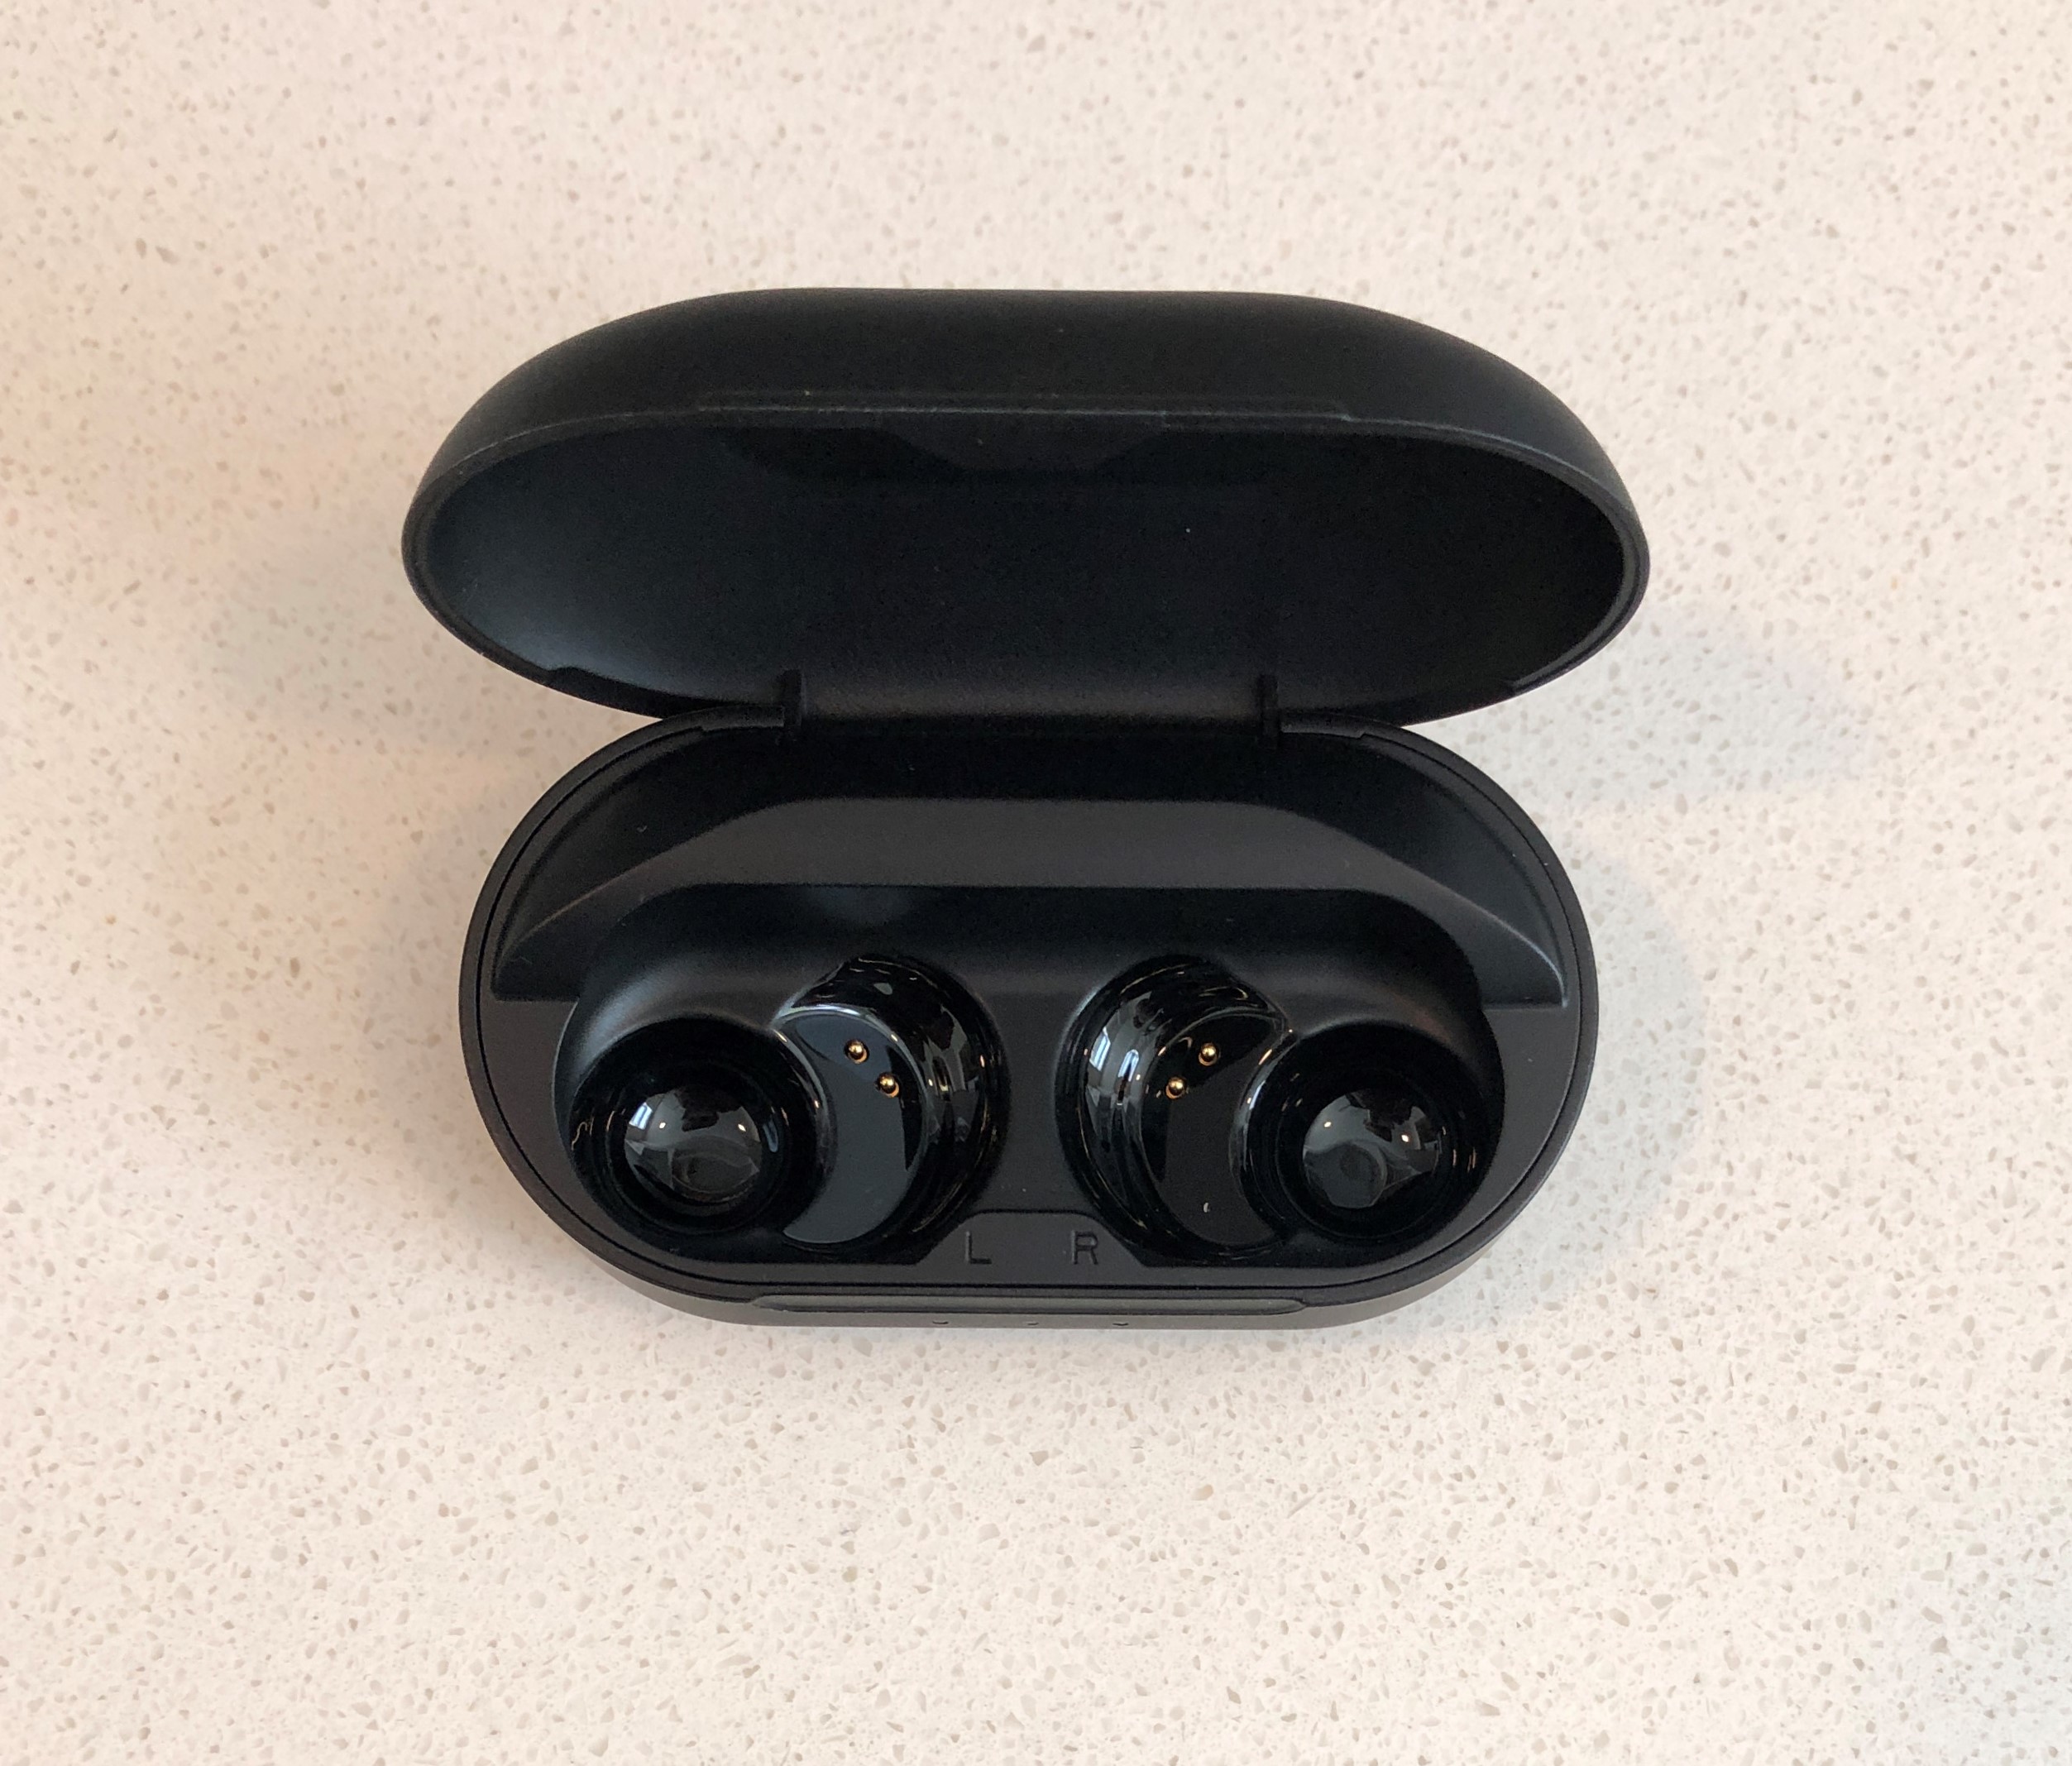 JLab JBuds Air Pro charging and carrying case inside